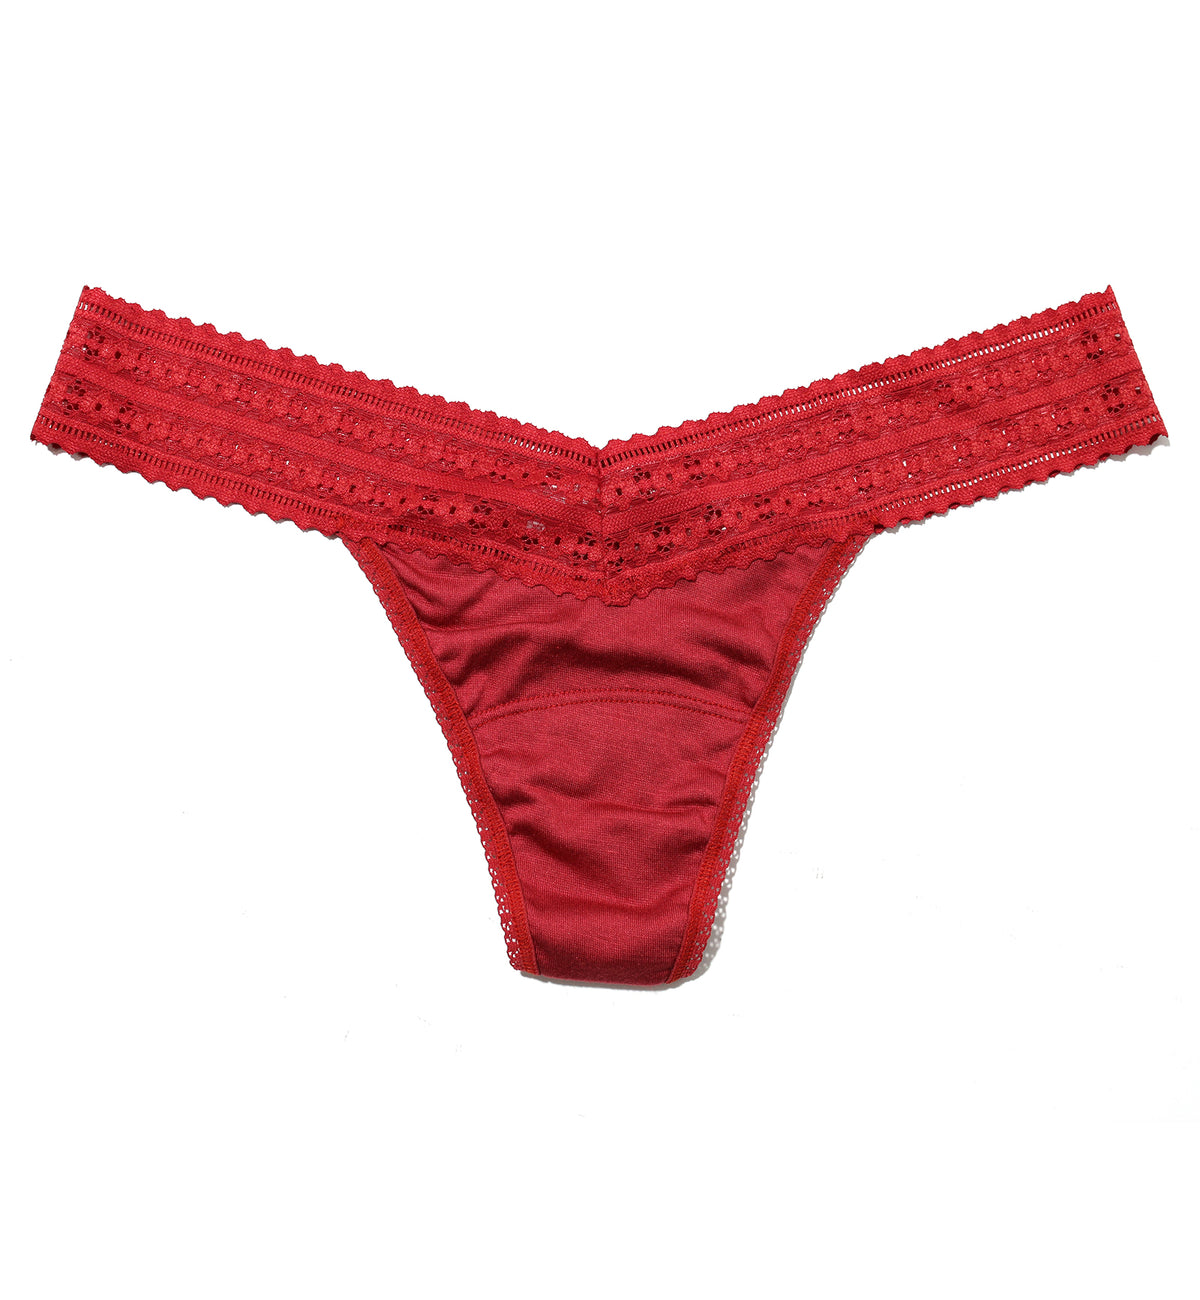 Hanky Panky Dream Low Rise Thong (631004),Burnt Sienna - Burnt Sienna,One Size